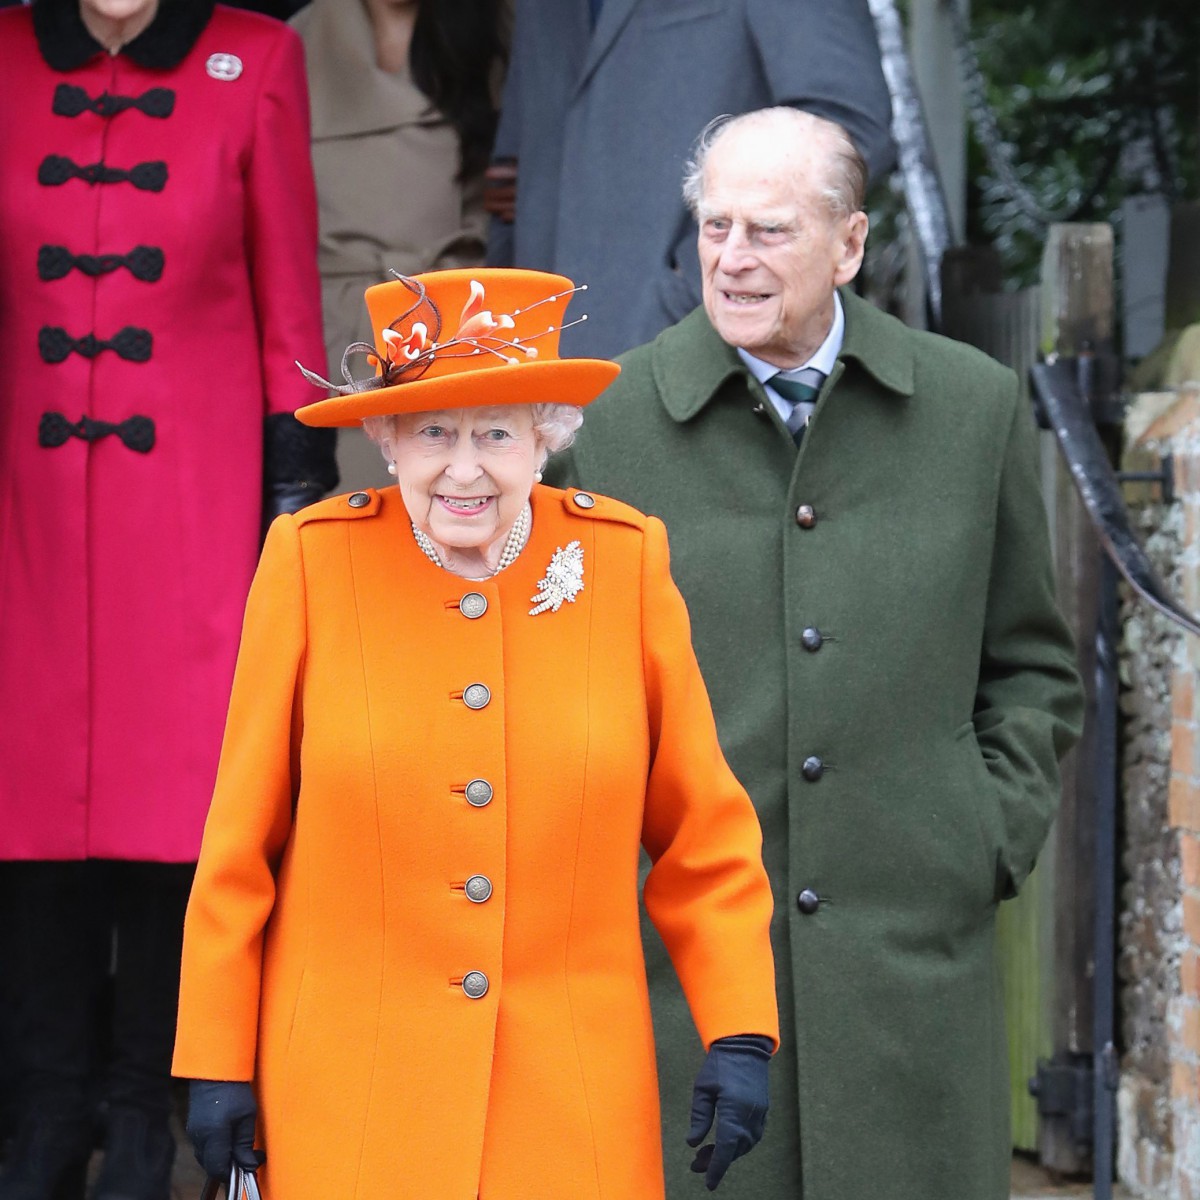 Prince Philip joined the royal family in 2017 for the Christmas service